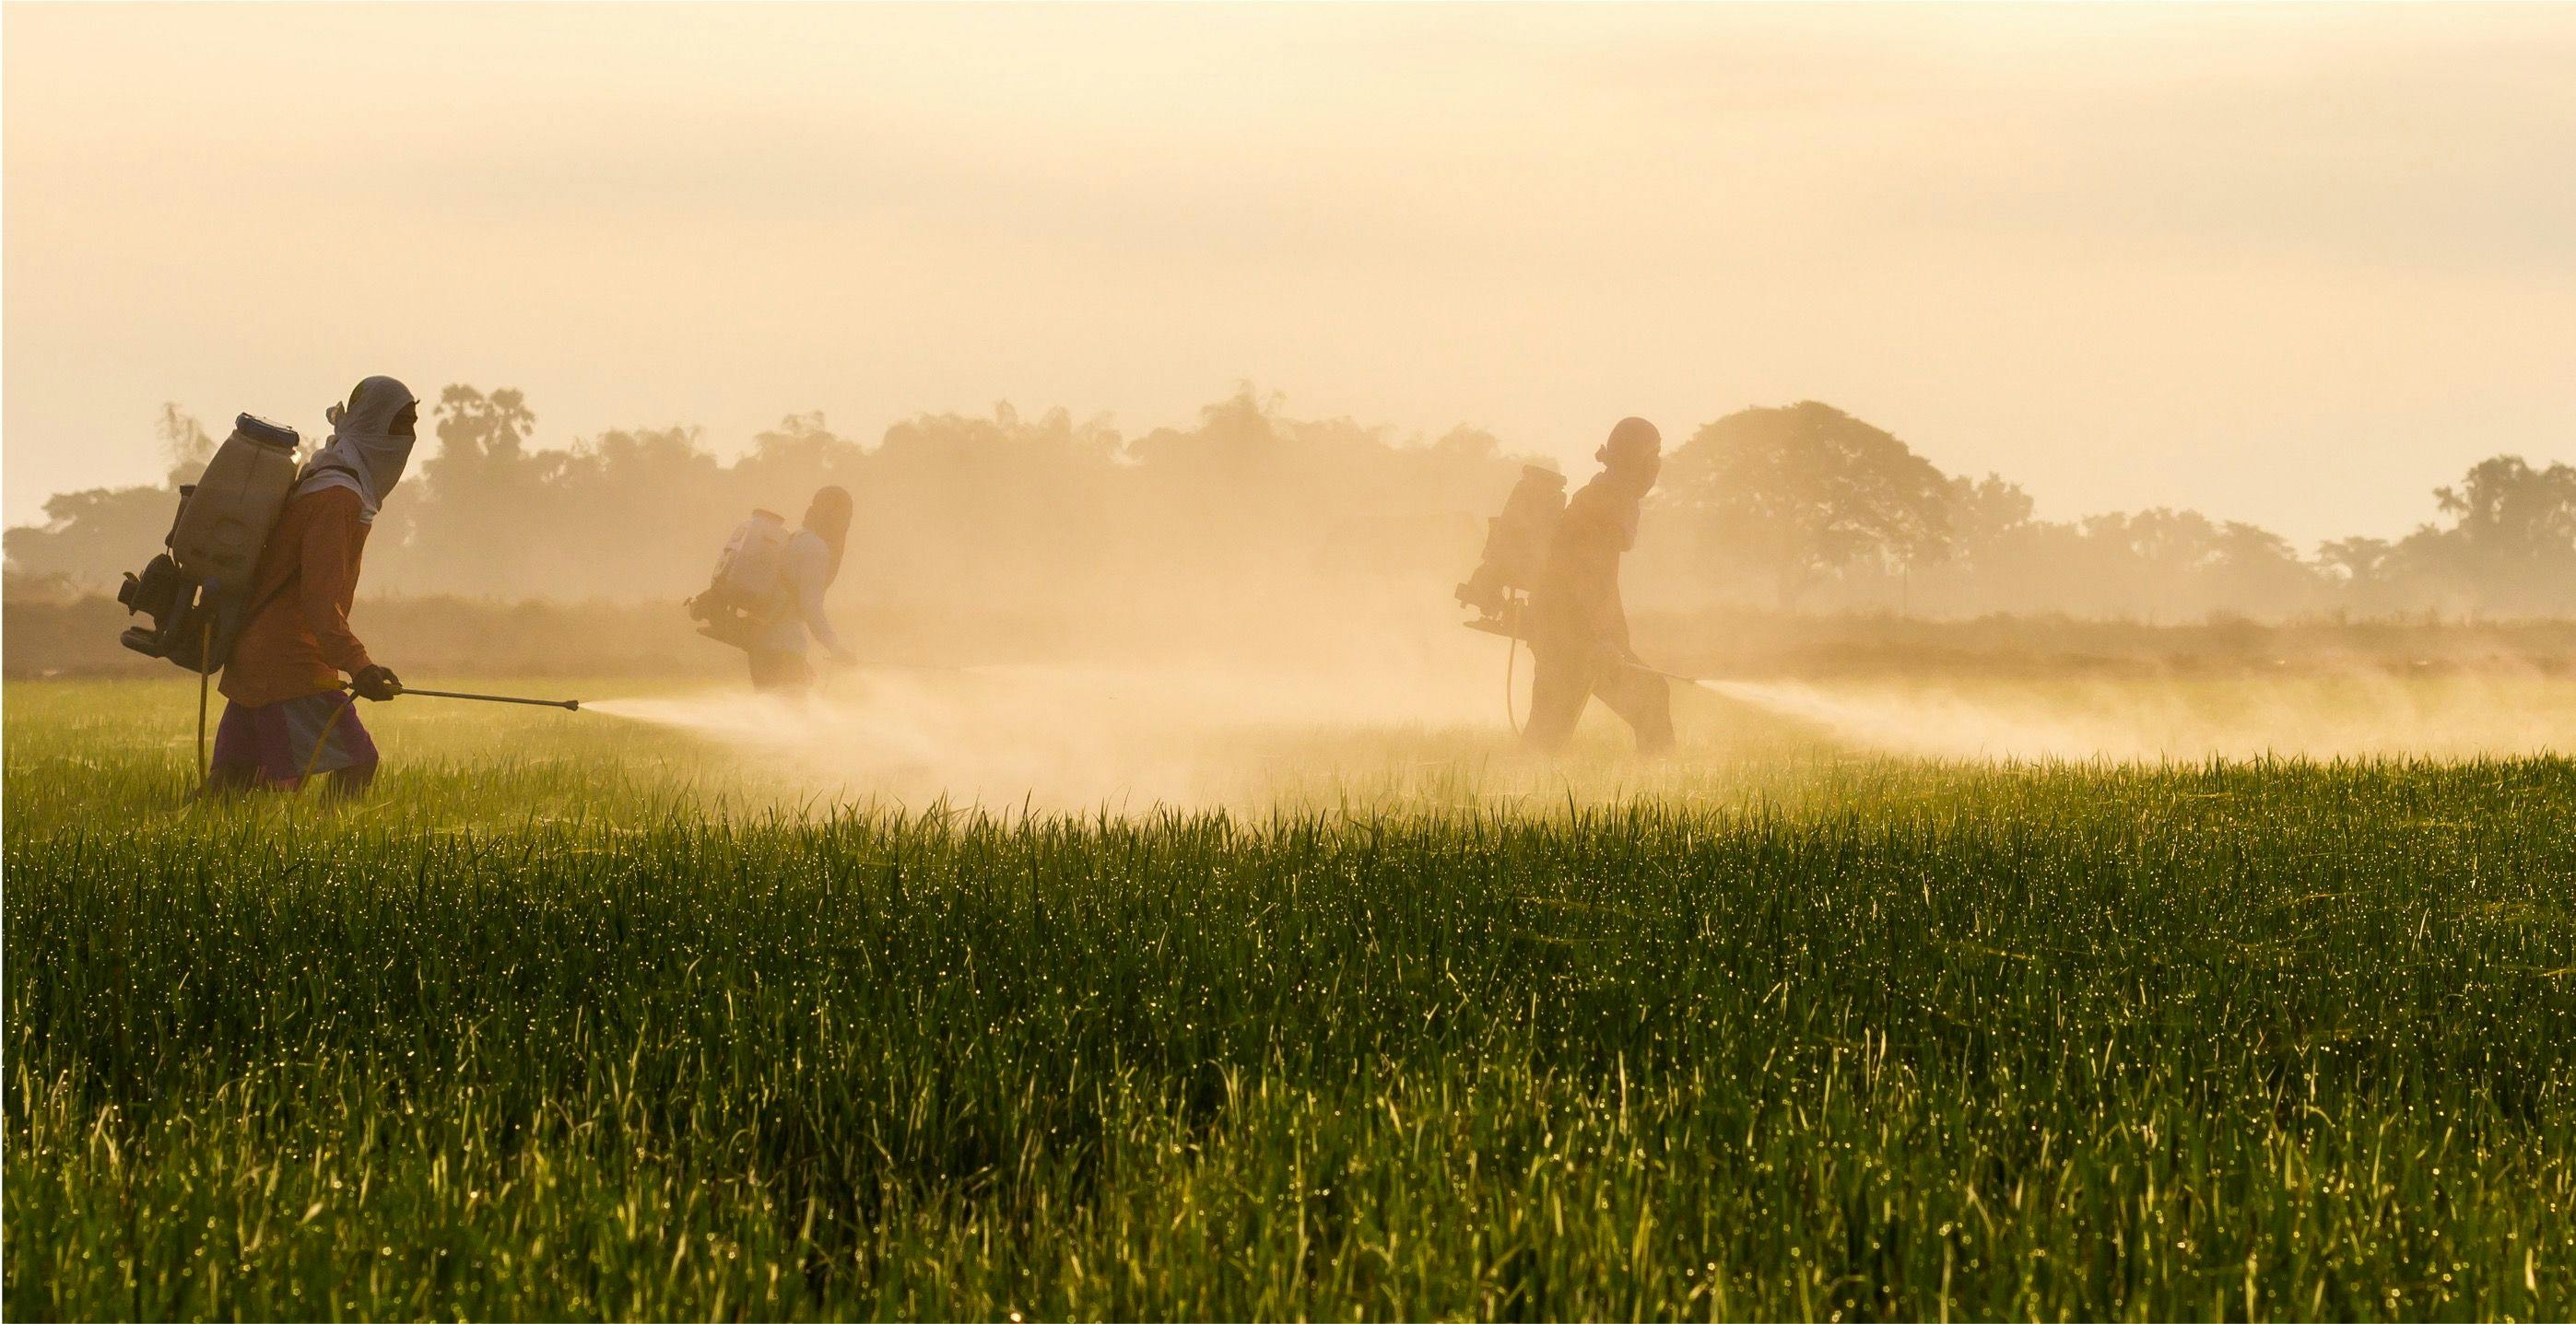 Workplace Pesticide Exposure Tied to Higher Risk of COPD, Suggests New Study